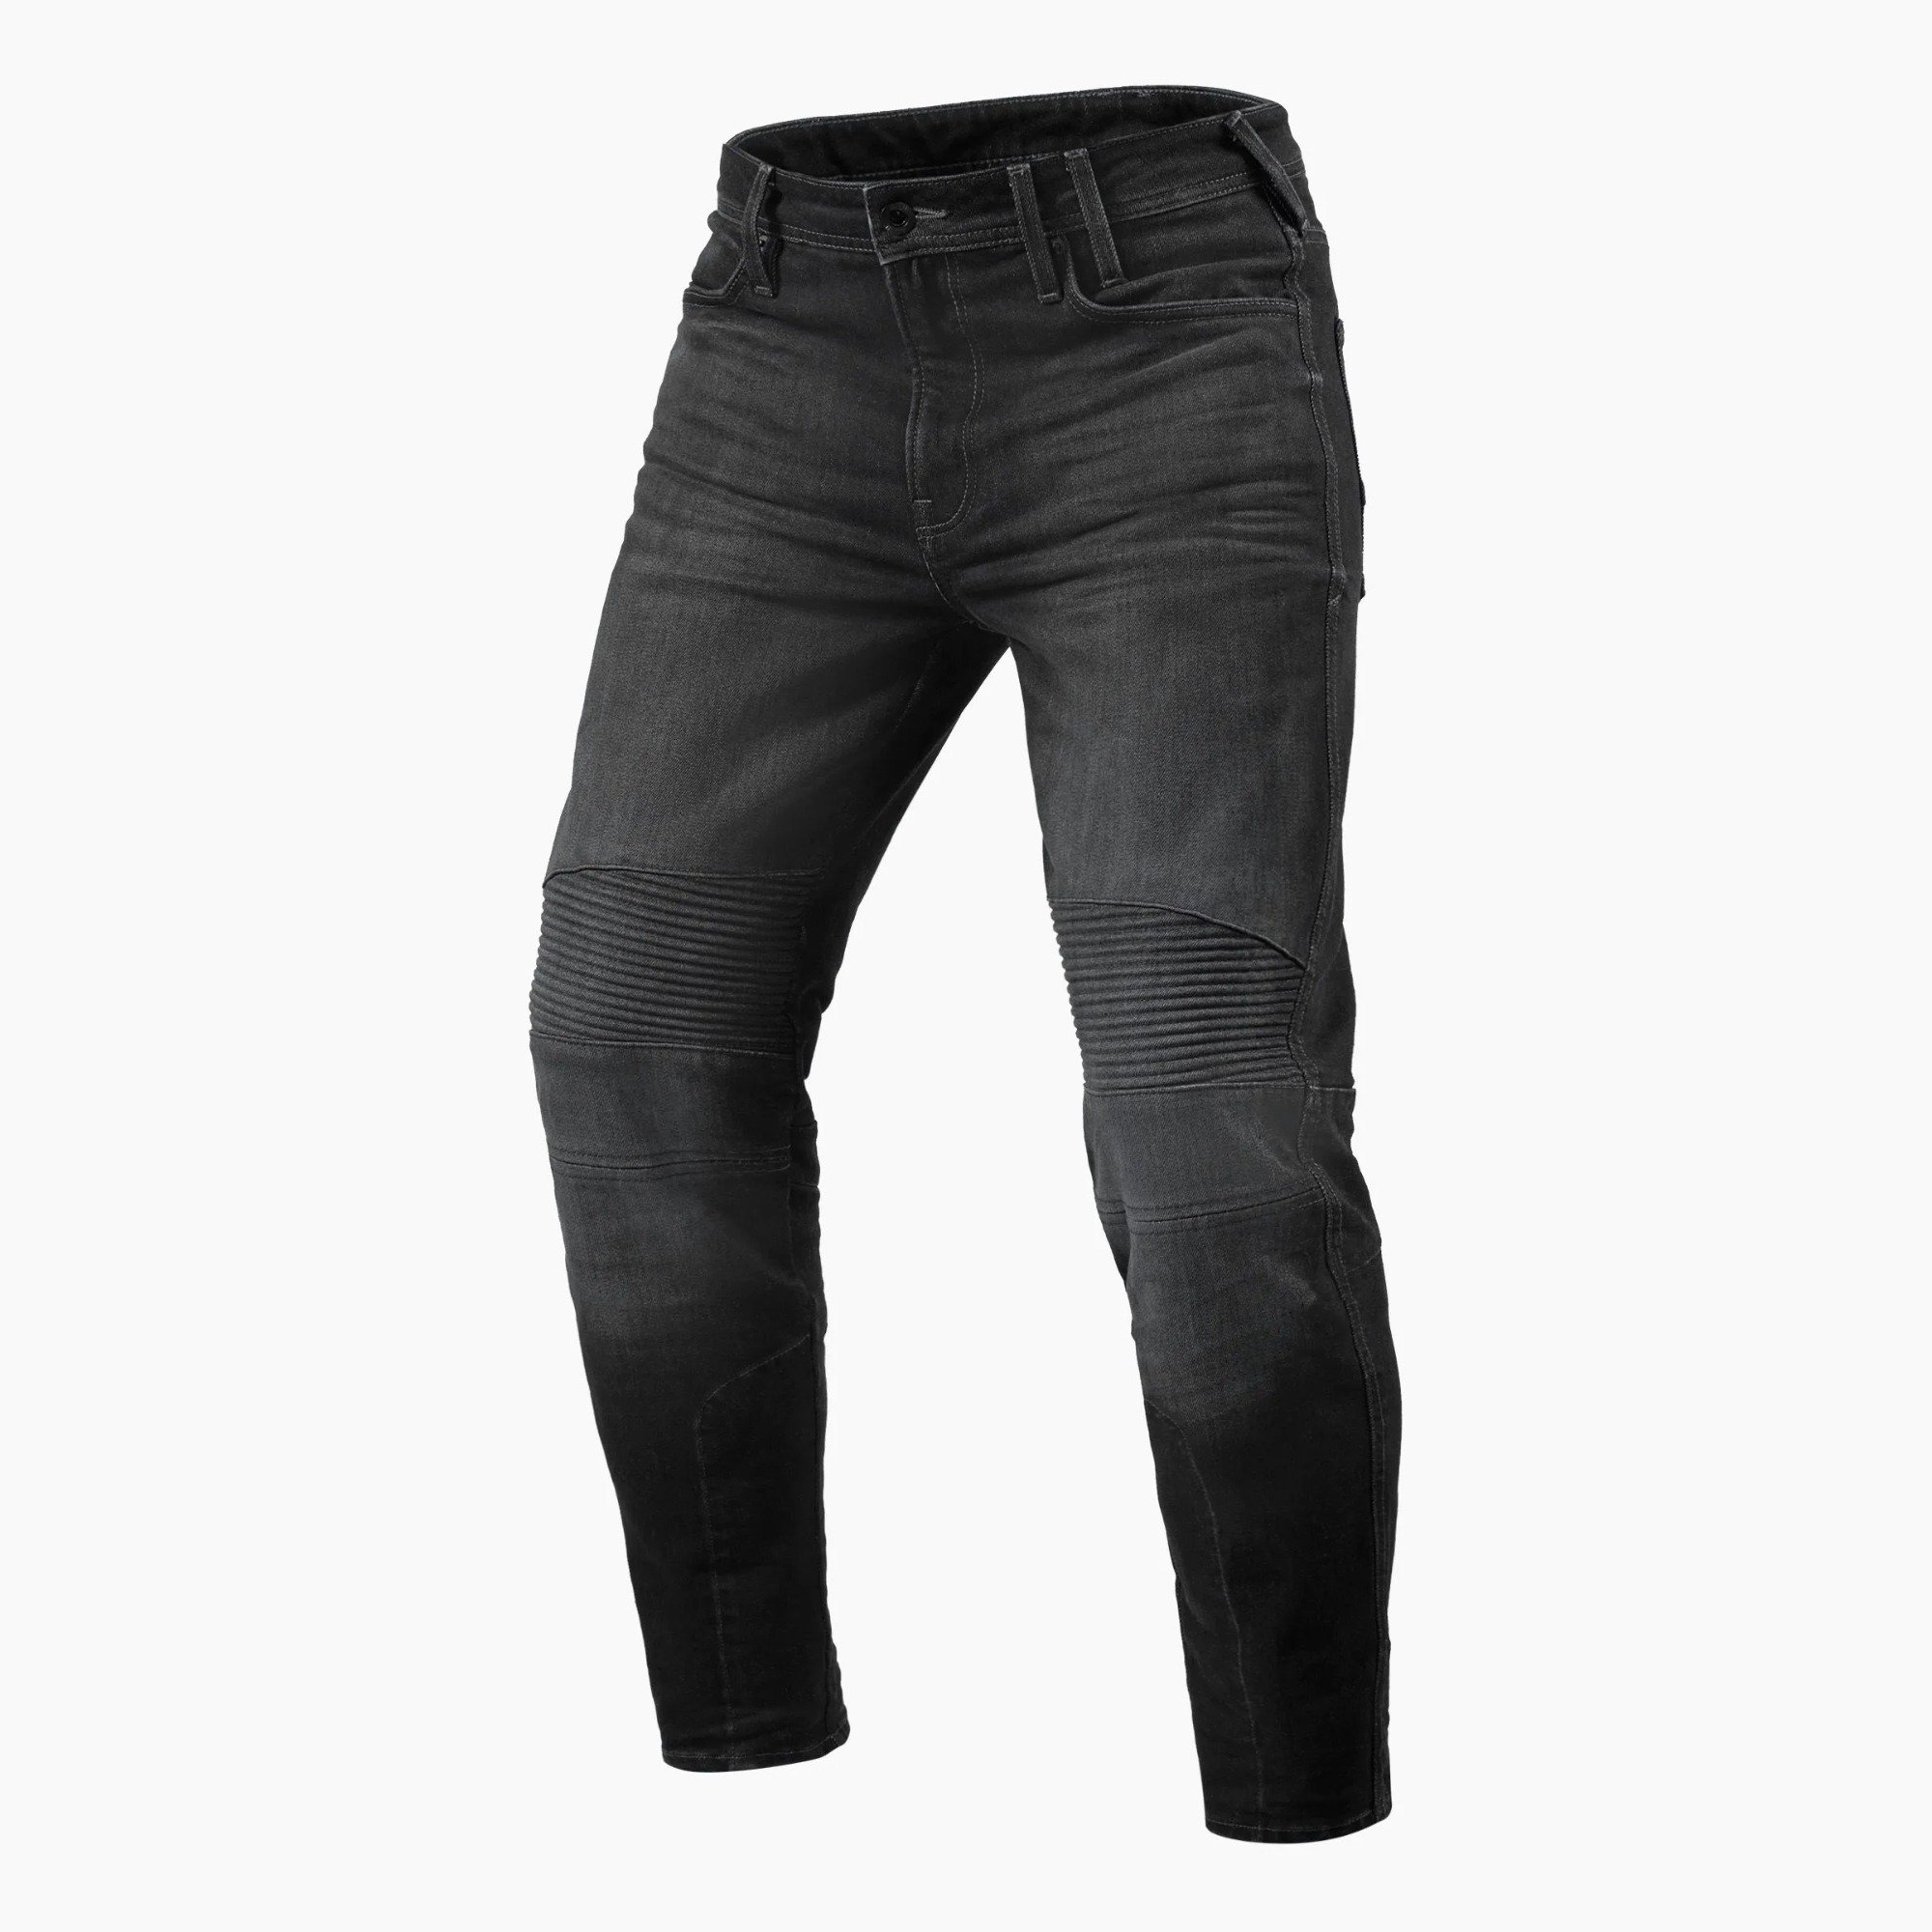 Image of REV'IT! Jeans Moto 2 TF Dark Grey Used Motorcycle Jeans Size L32/W30 ID 8700001337694